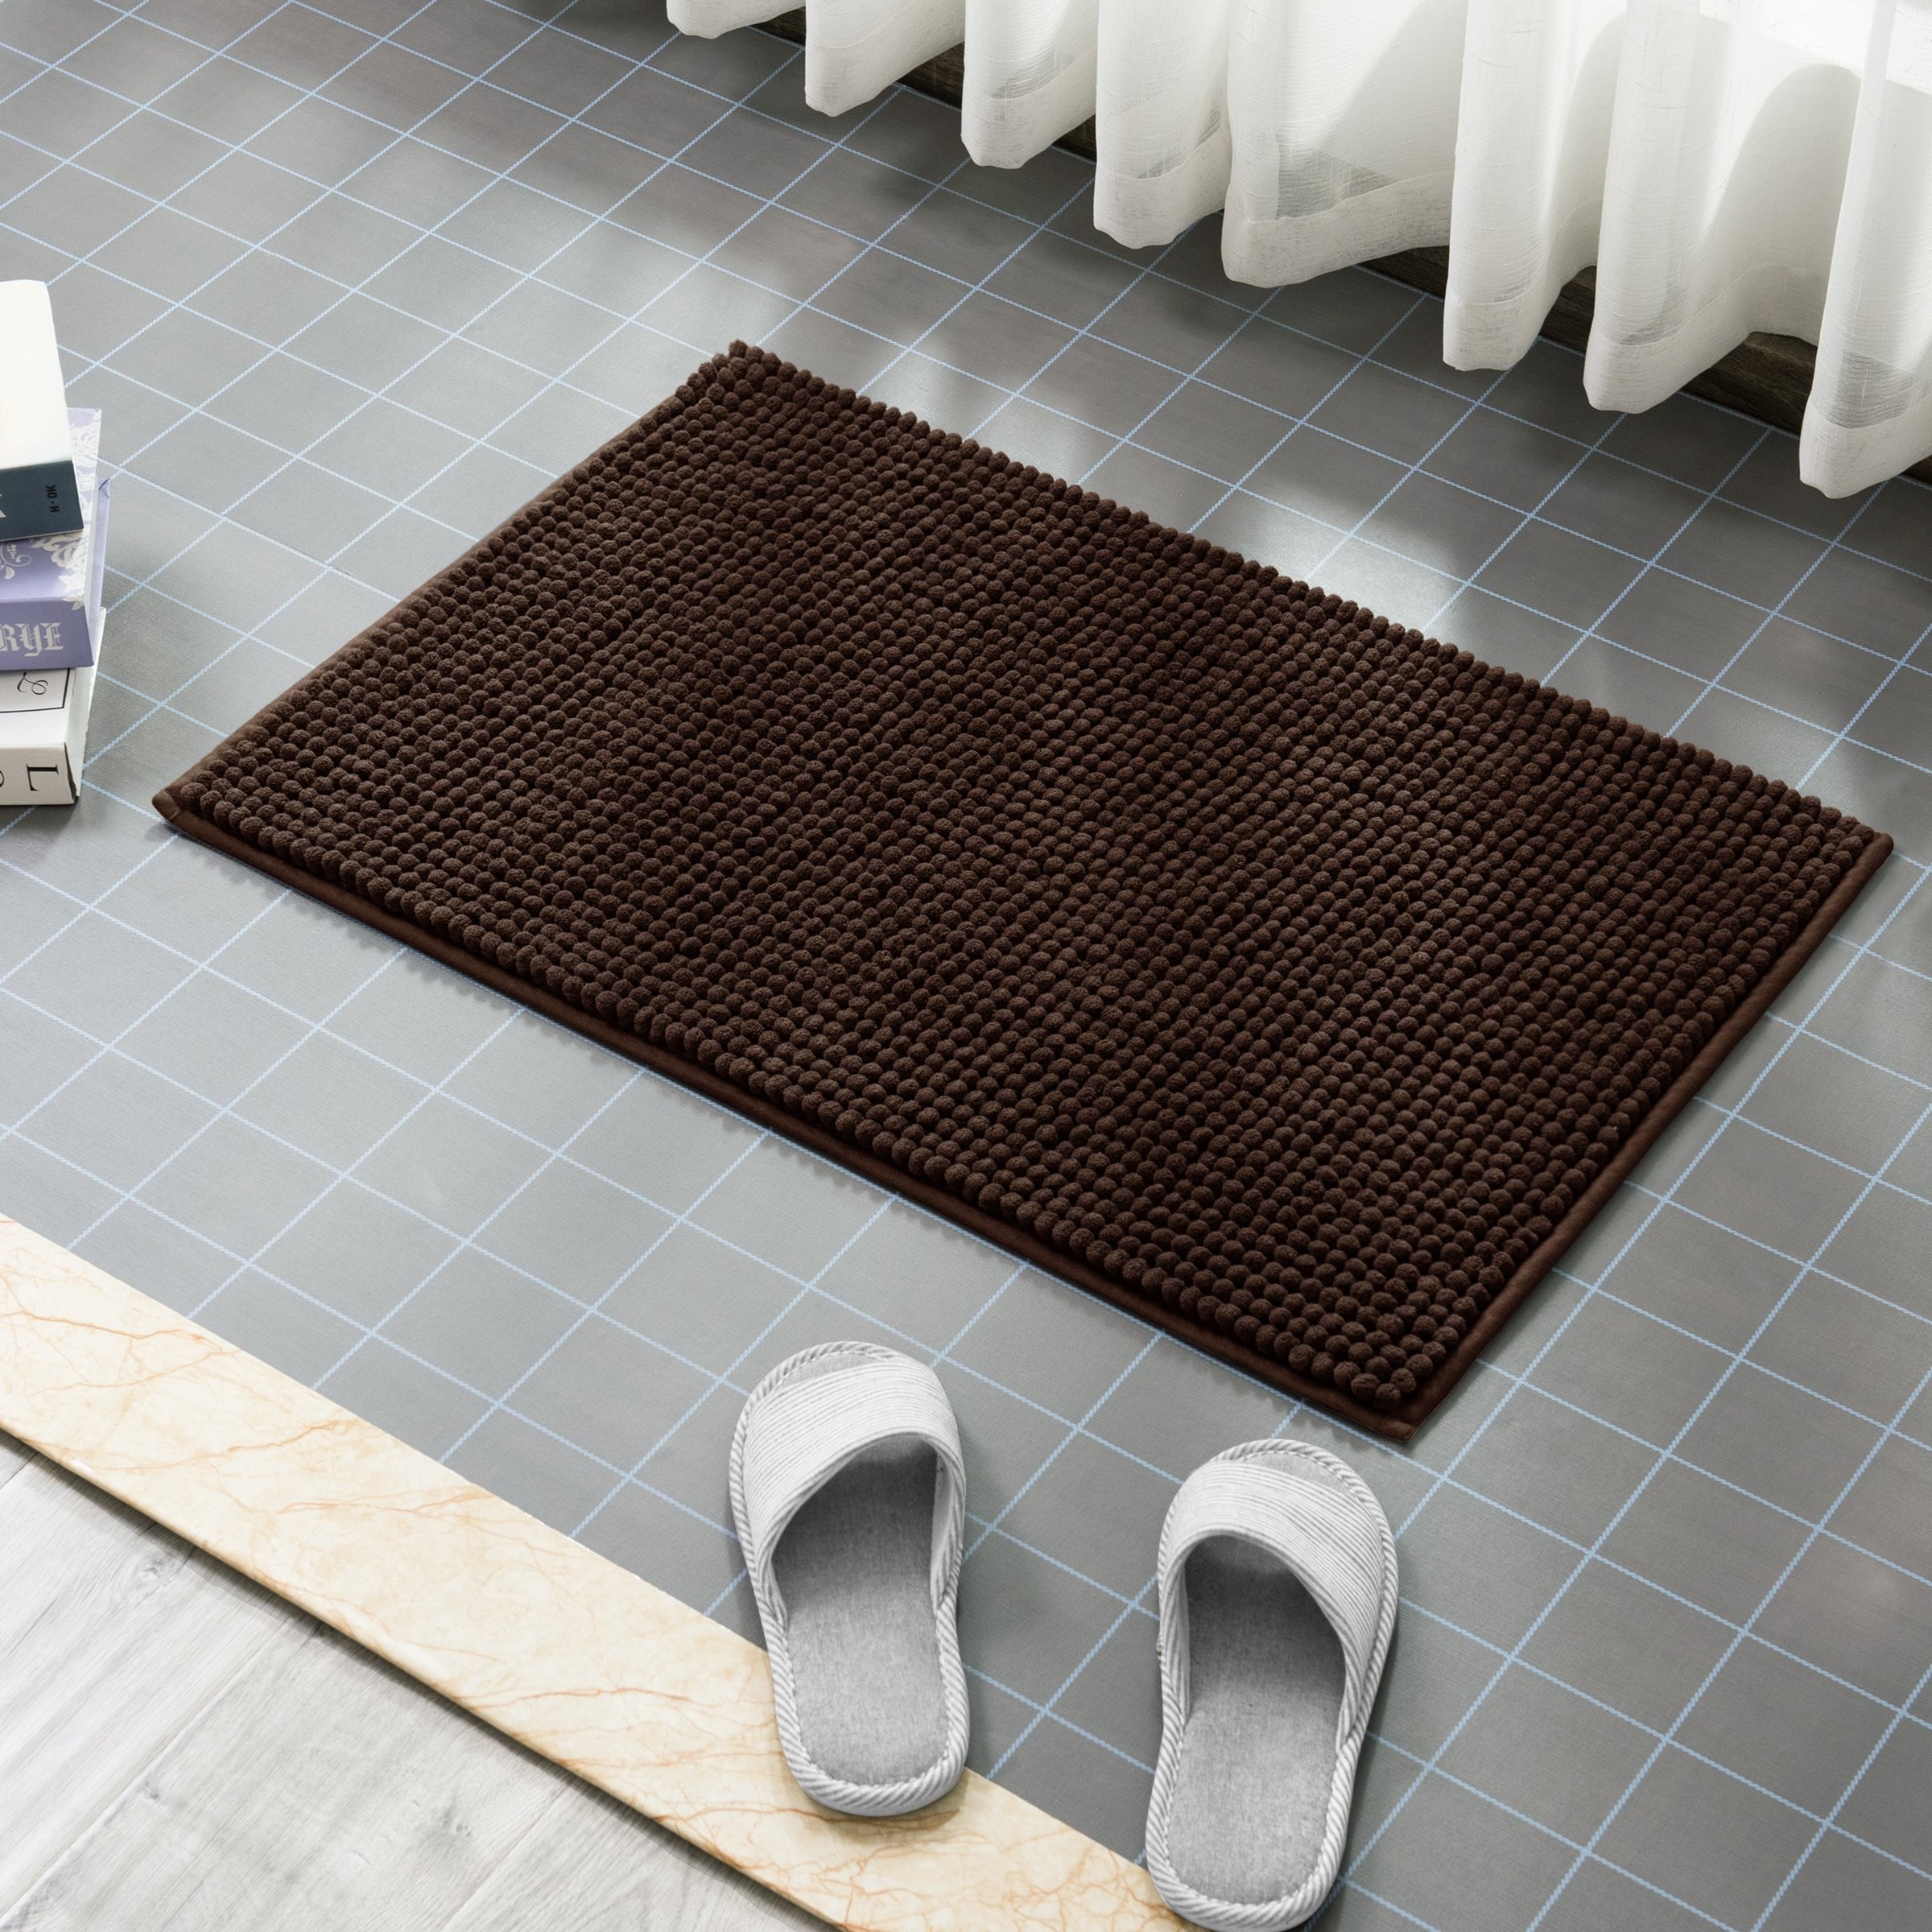 https://ak1.ostkcdn.com/images/products/is/images/direct/524f8fcacbe7c53d9016f34b9830539c6969540a/Subrtex-Chenille-Bathroom-Rugs-Soft-Non-Slip-Super-Water-Absorbing-Shower-Mats.jpg